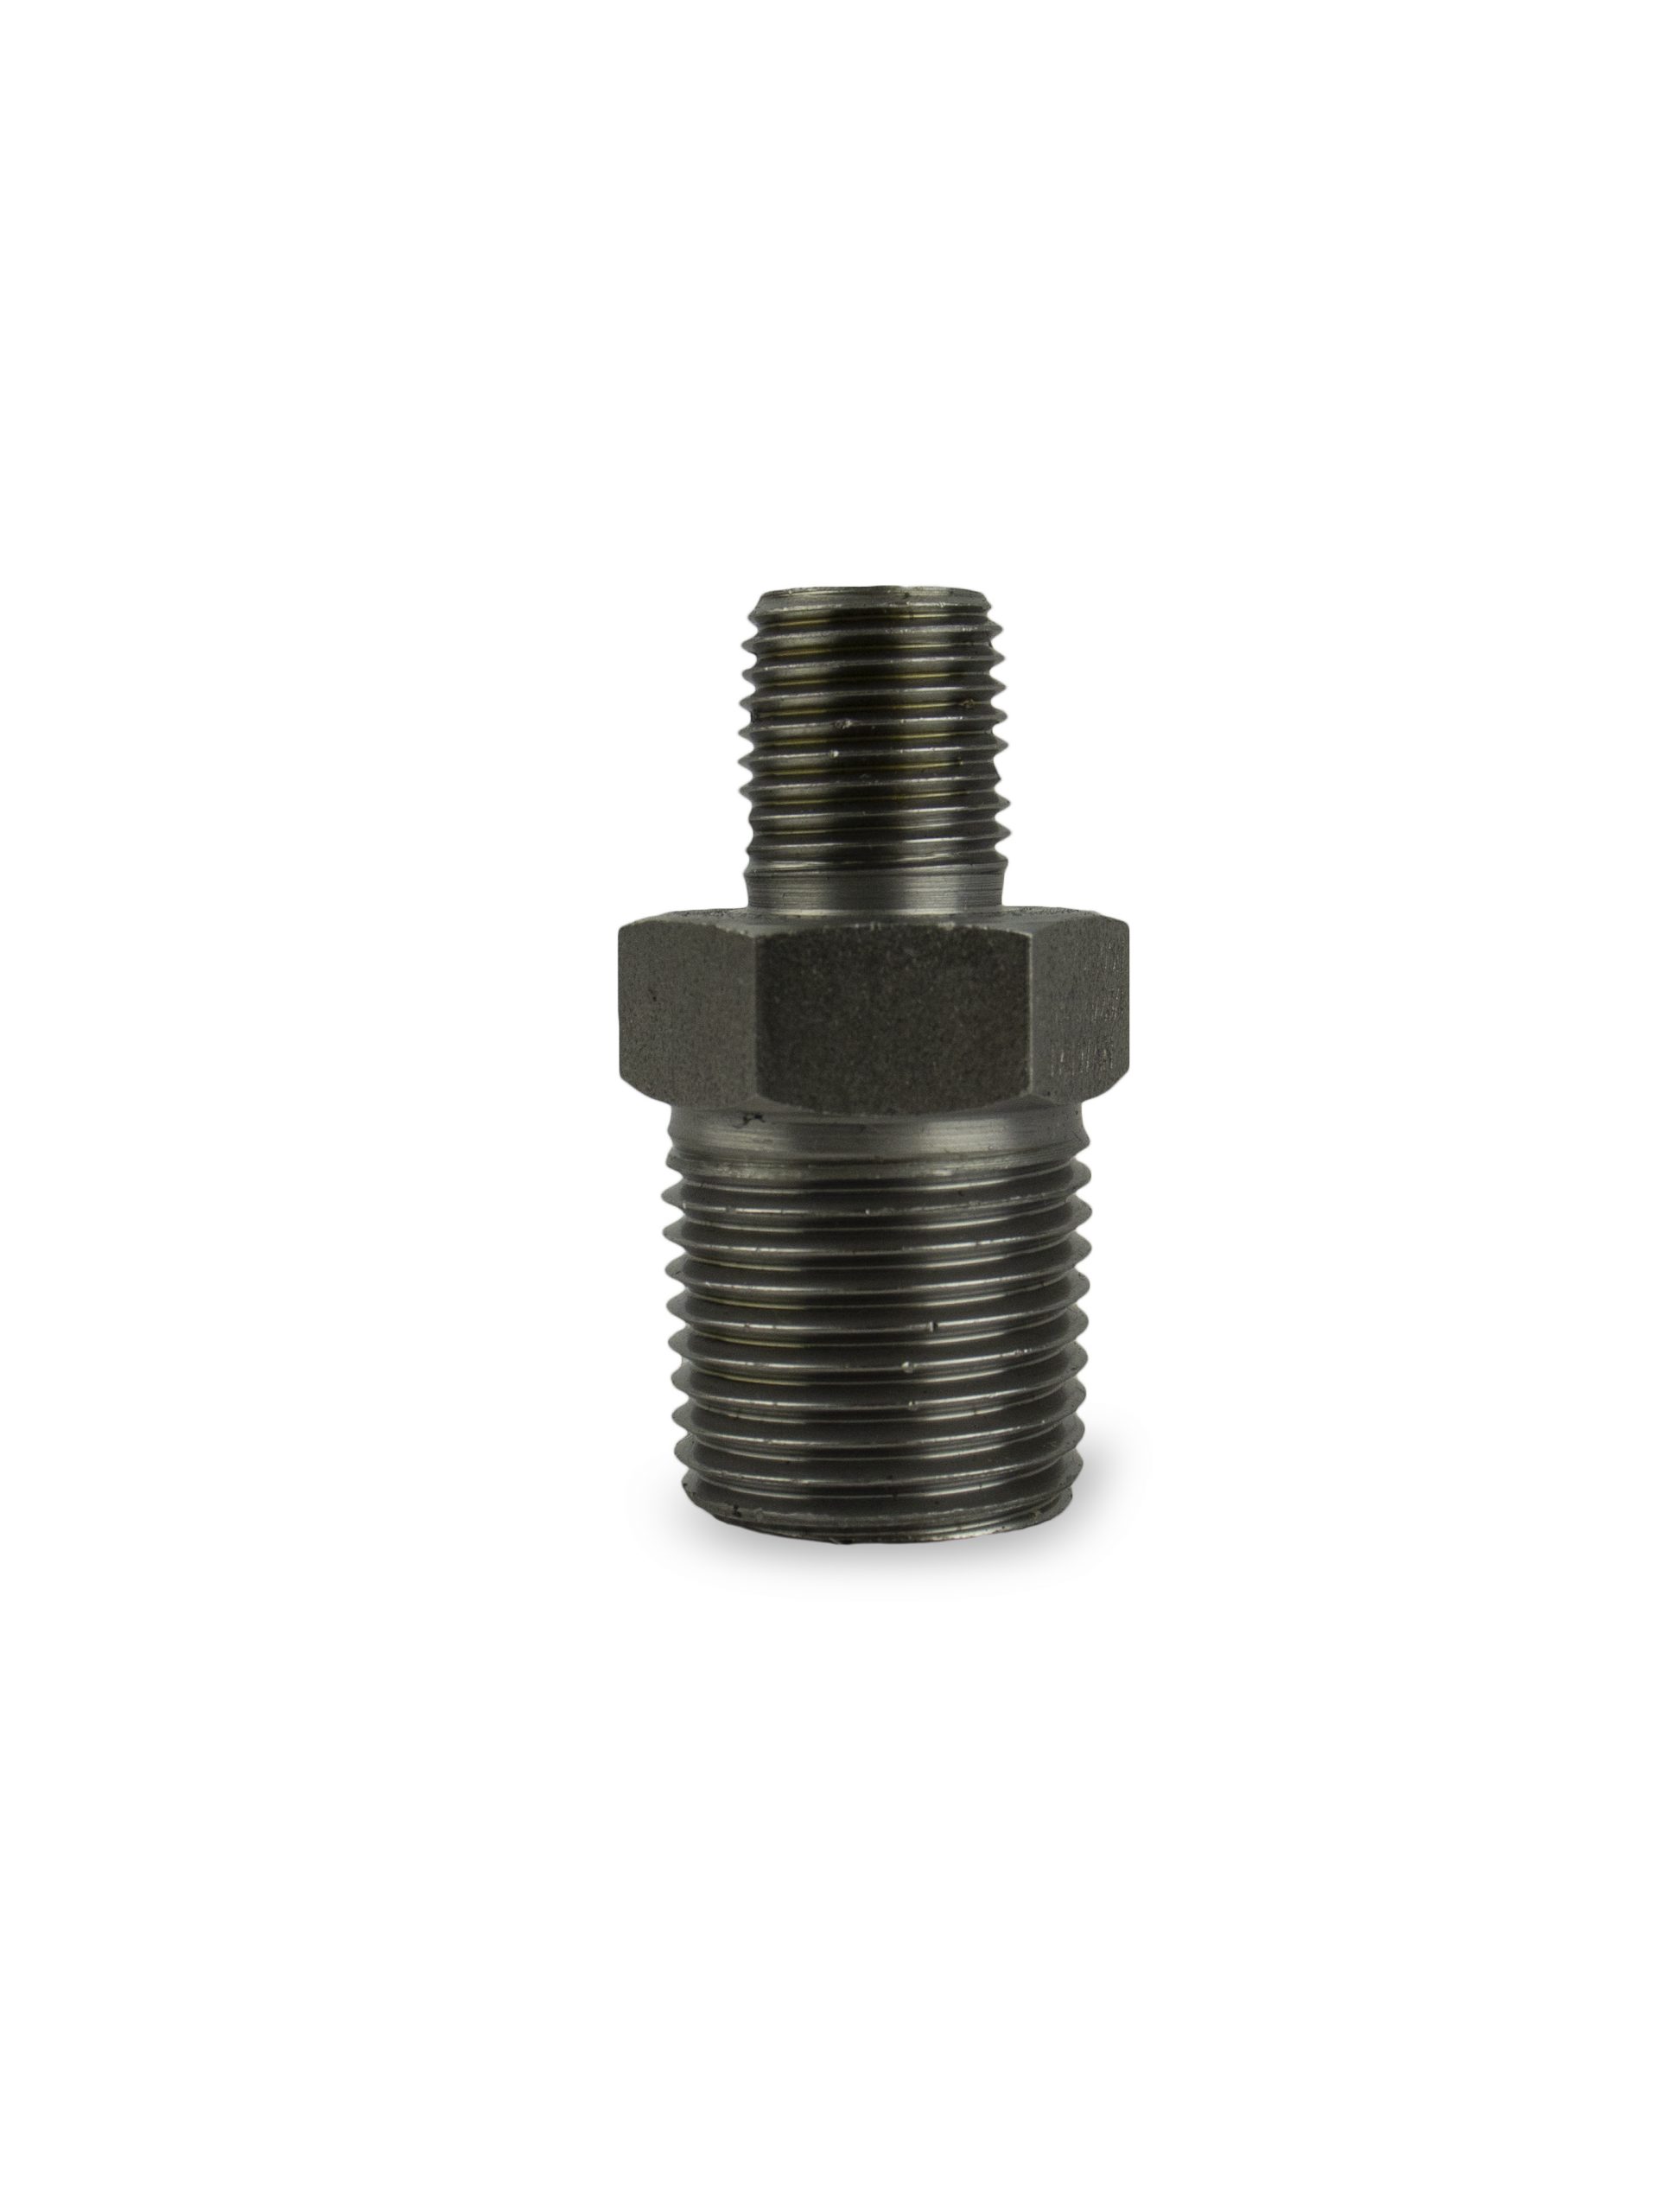 FORGED STEEL REDUCER HEX NIPPLE 1/2 Inches X 1/4 Inches CLASS 3000 from Gas Equipment Company Llc Abu Dhabi, UNITED ARAB EMIRATES